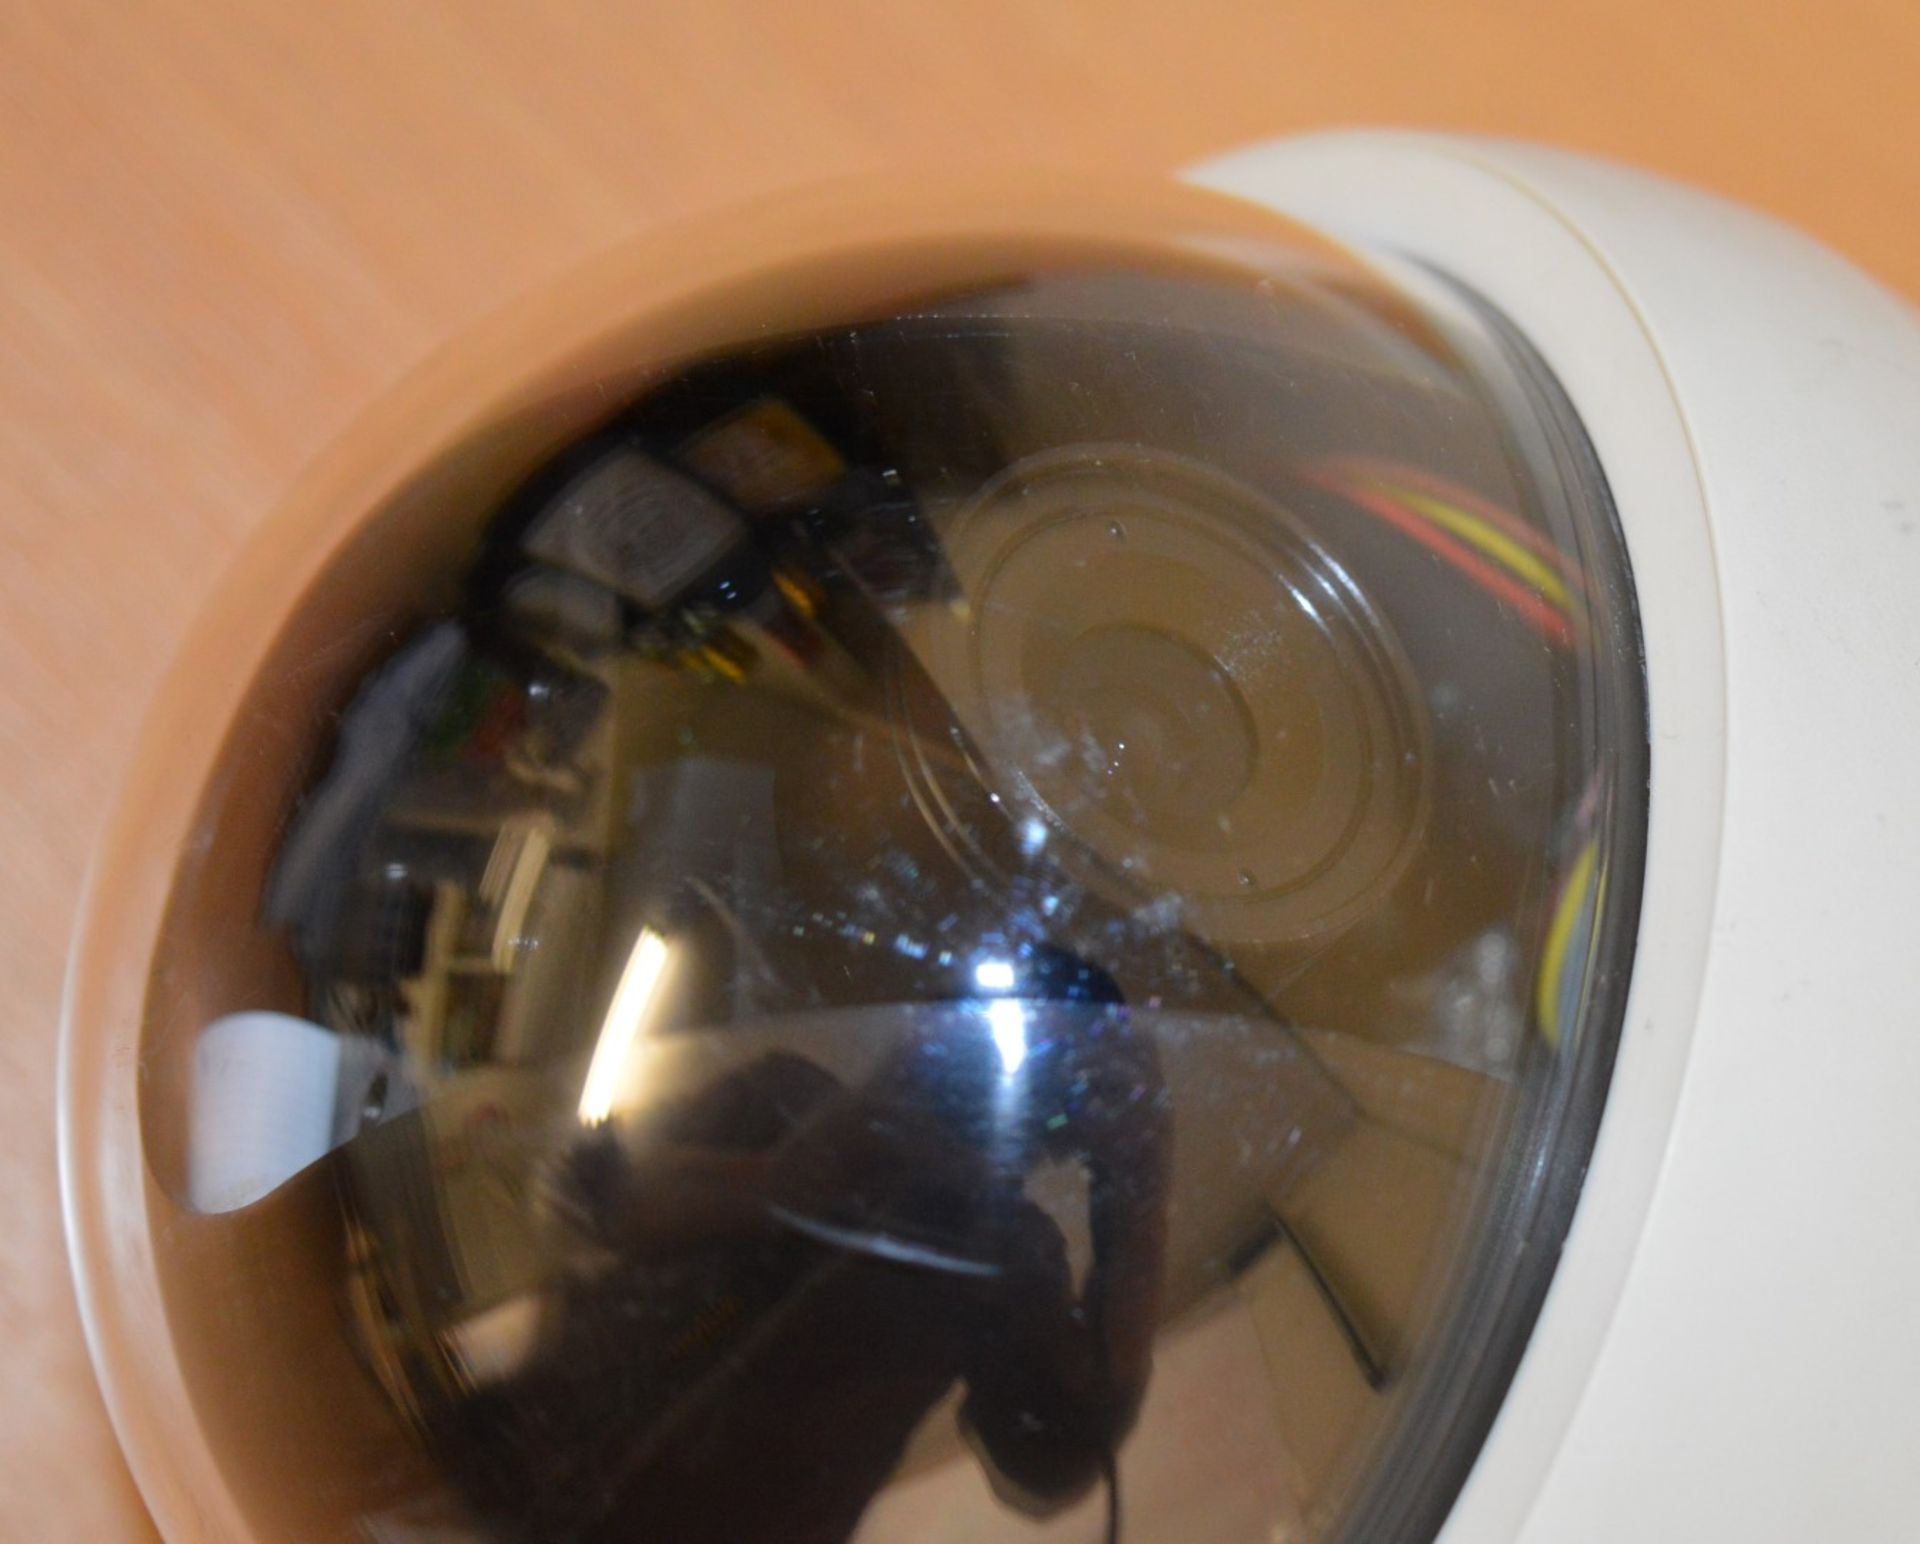 2 x Swann Tilt and Zoom Weather Resistant Dome Cameras - State of The Art - Uses Sony Components - - Image 5 of 5